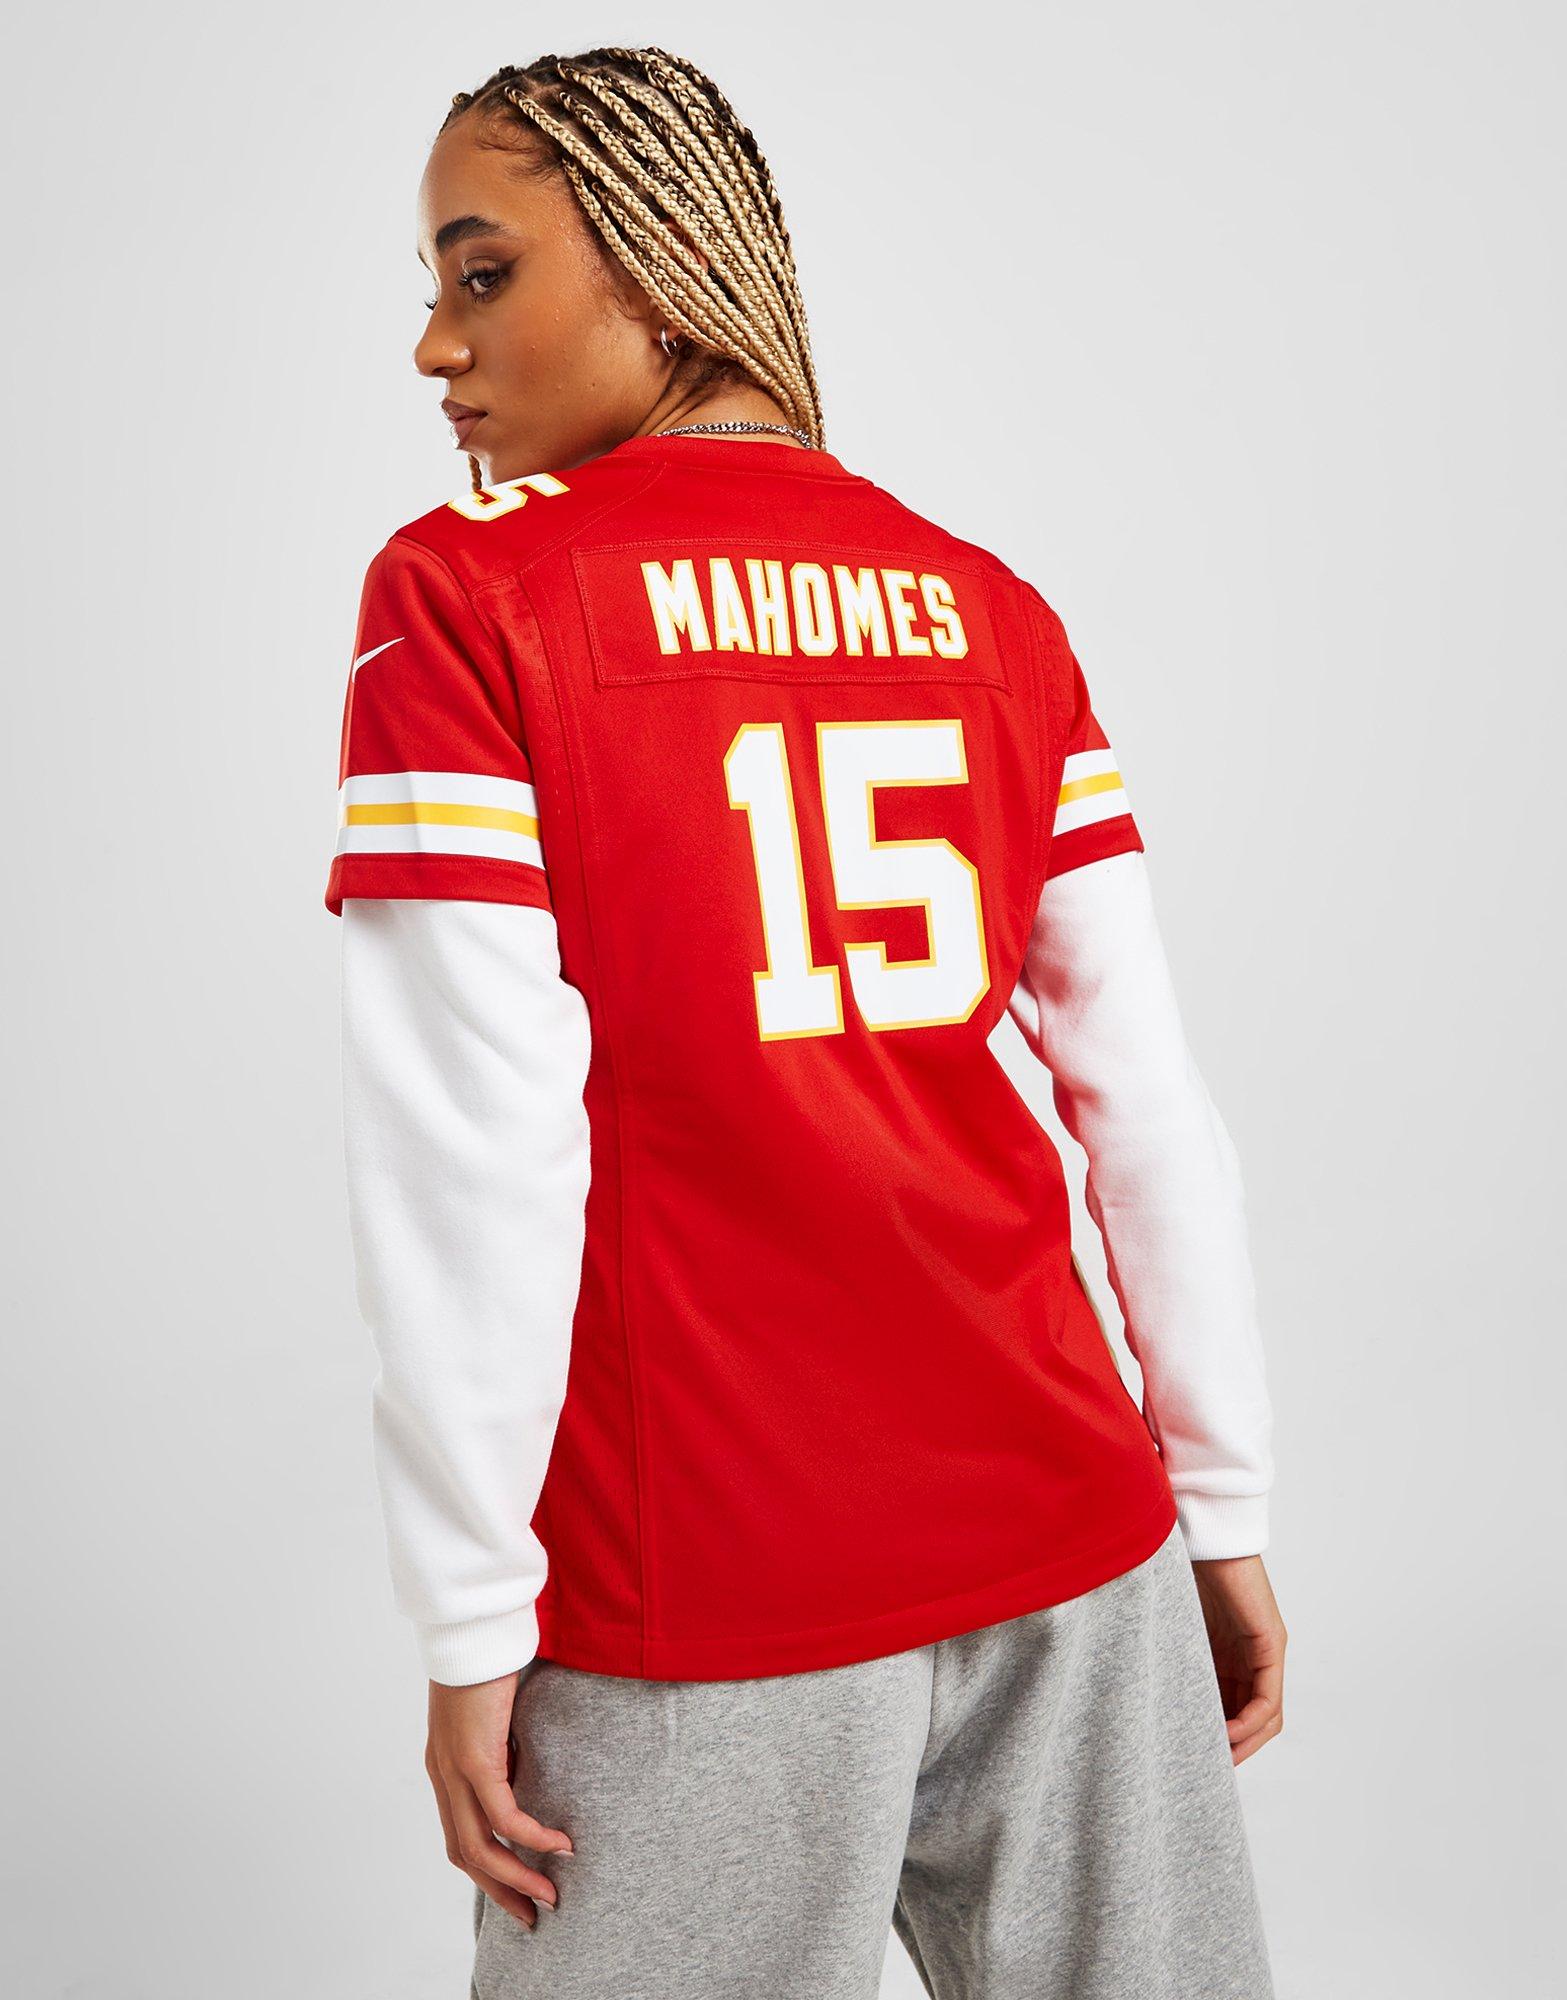 Red Nike NFL Kansas City Chiefs Limited Mahomes #15 Jersey - JD Sports